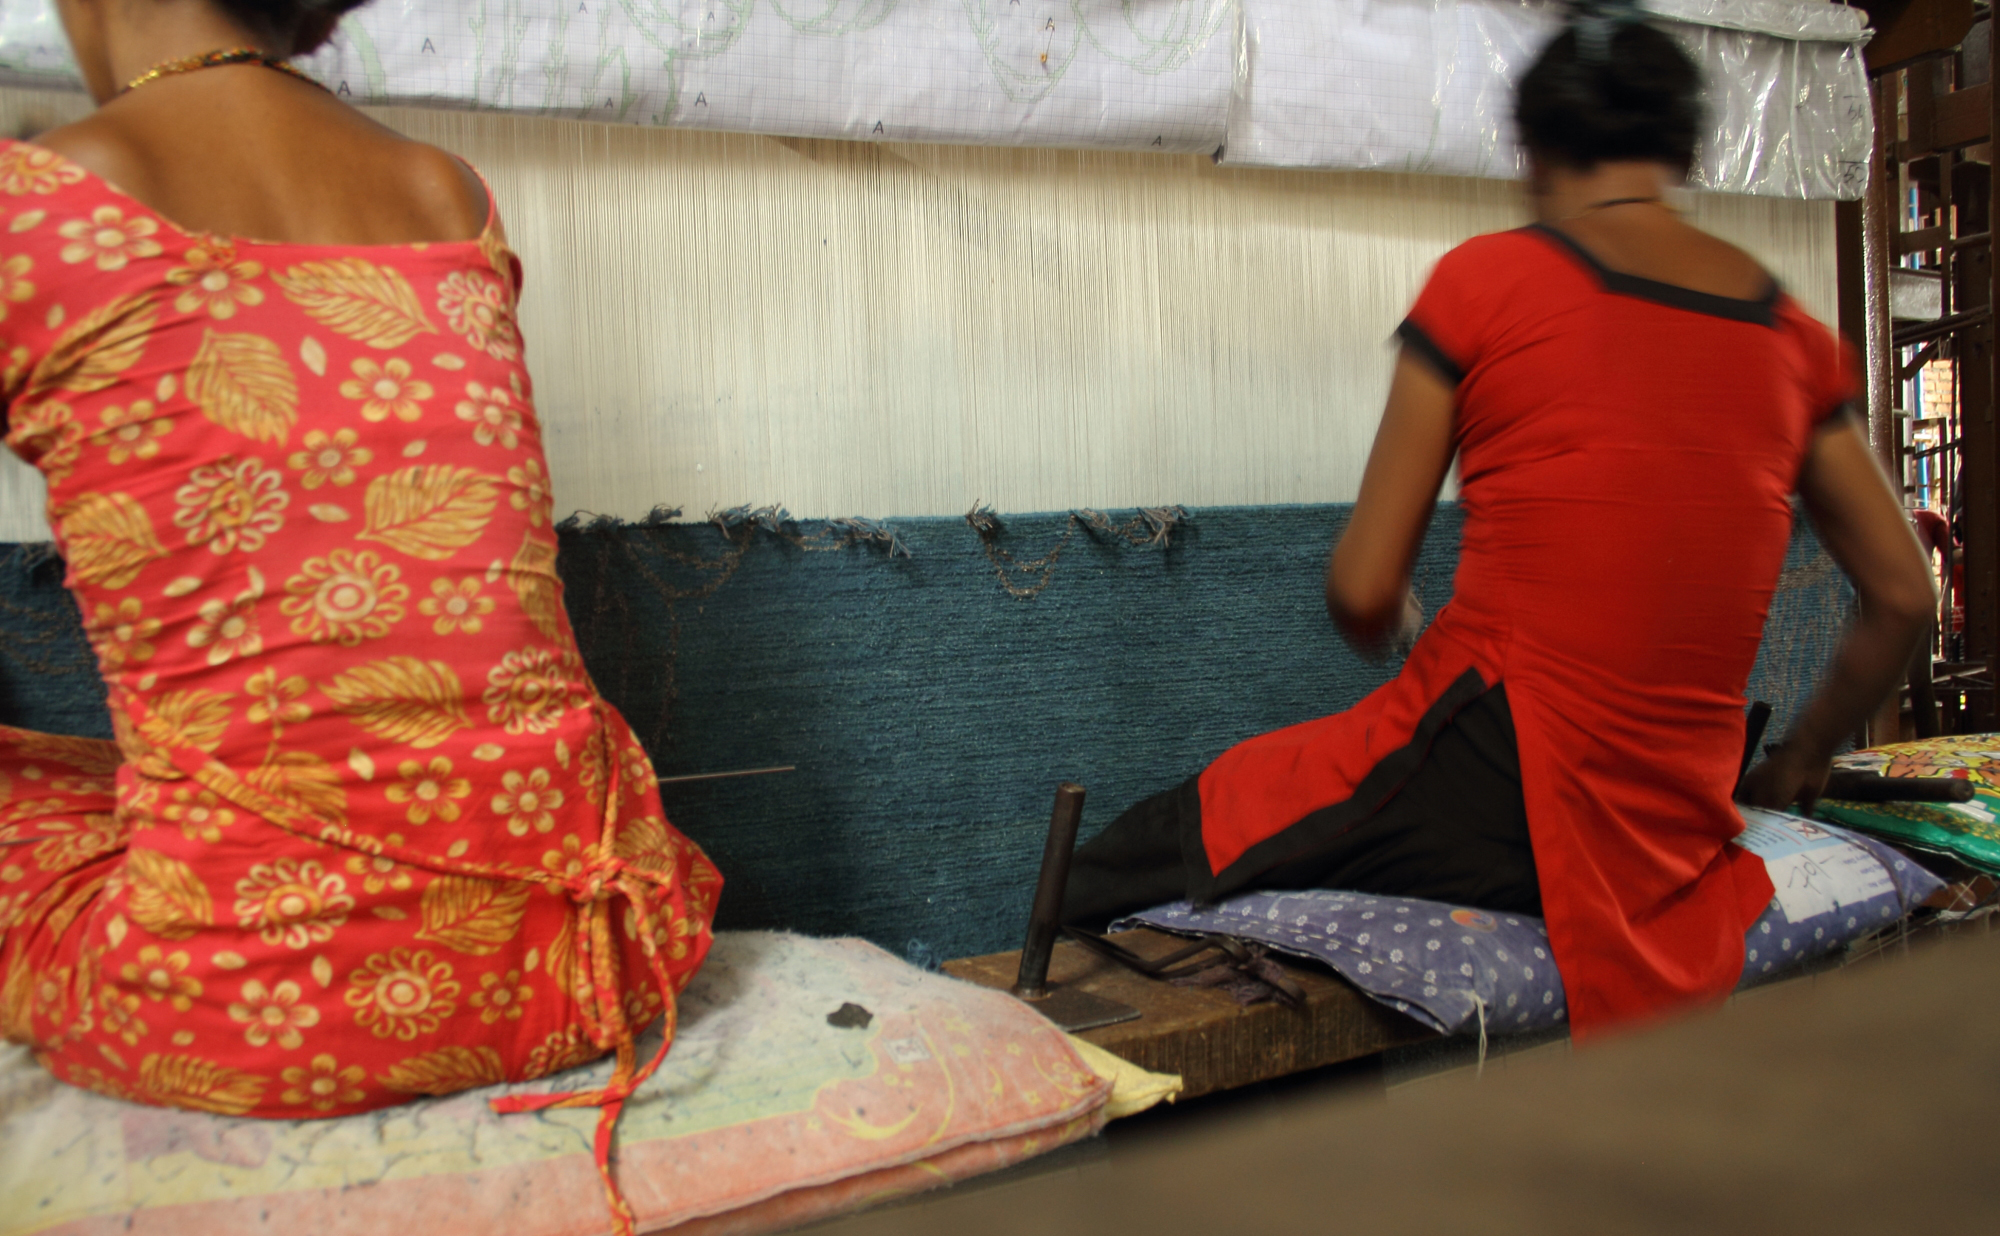 'Asian Quilt' by Kooches is shown on-loom in Kathmandu being woven by two (2) Nepali women. Note the cartoon (design plate) on the loom (at the top of the image) which has the carpet design w/colour references drawn out allowing the weavers to accurately translate the design from concept to reality. | Image courtesy of Kooches.